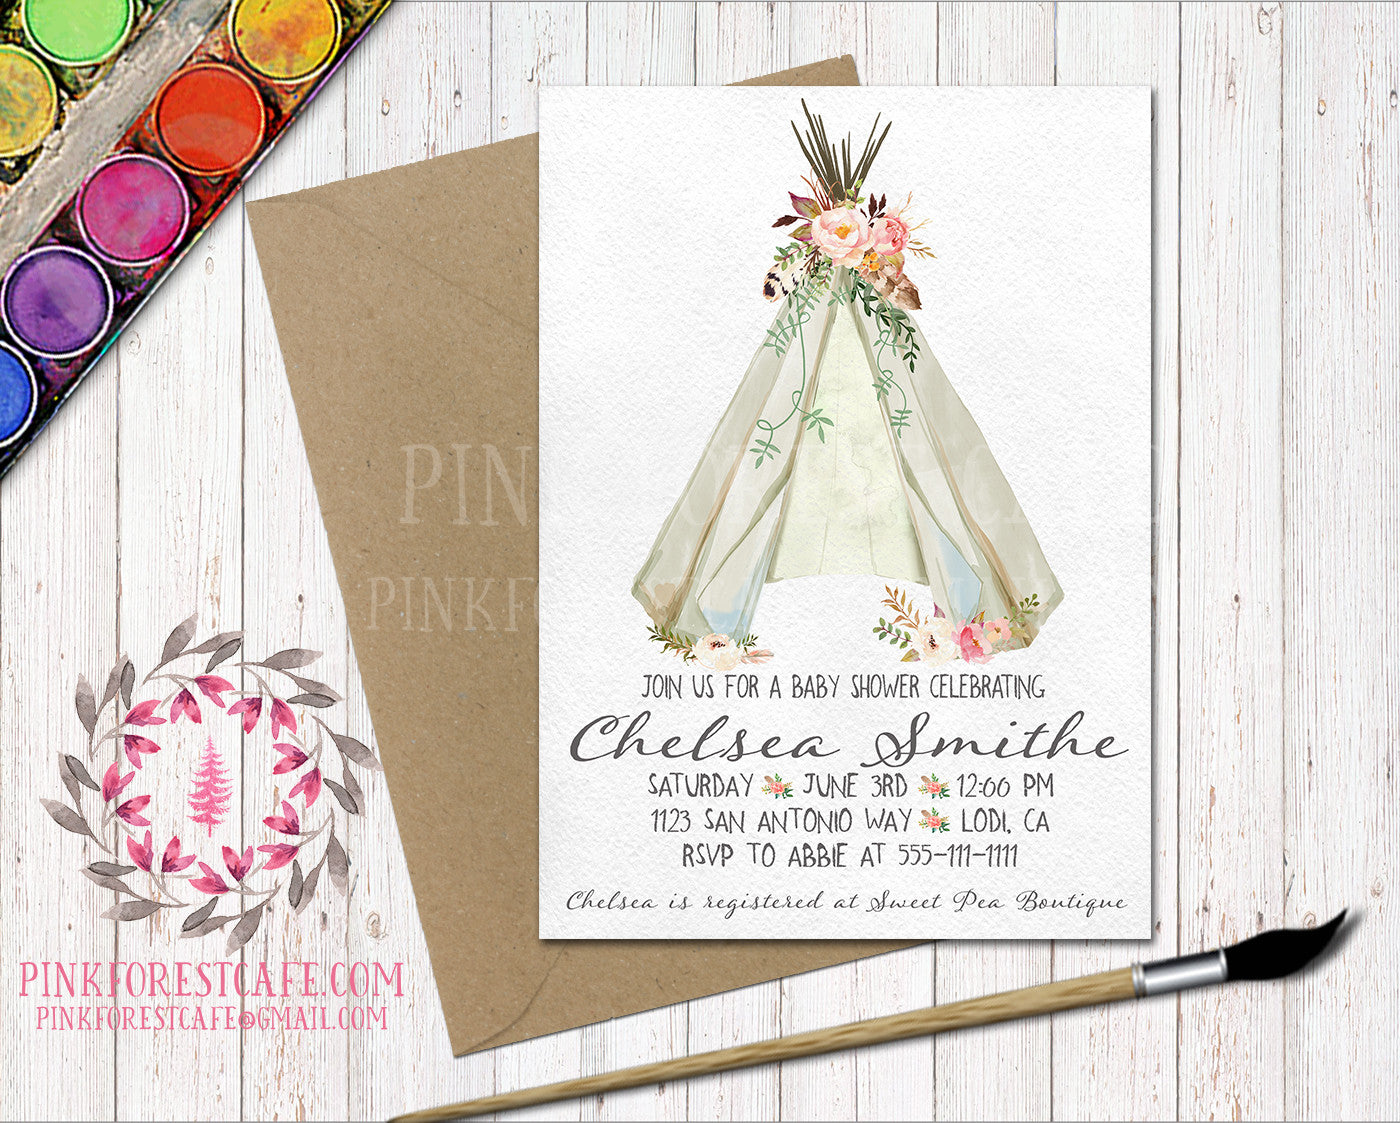 Boho Teepee Floral Watercolor Woodland Baby Bridal Shower Birthday Party Printable Invite Invitation